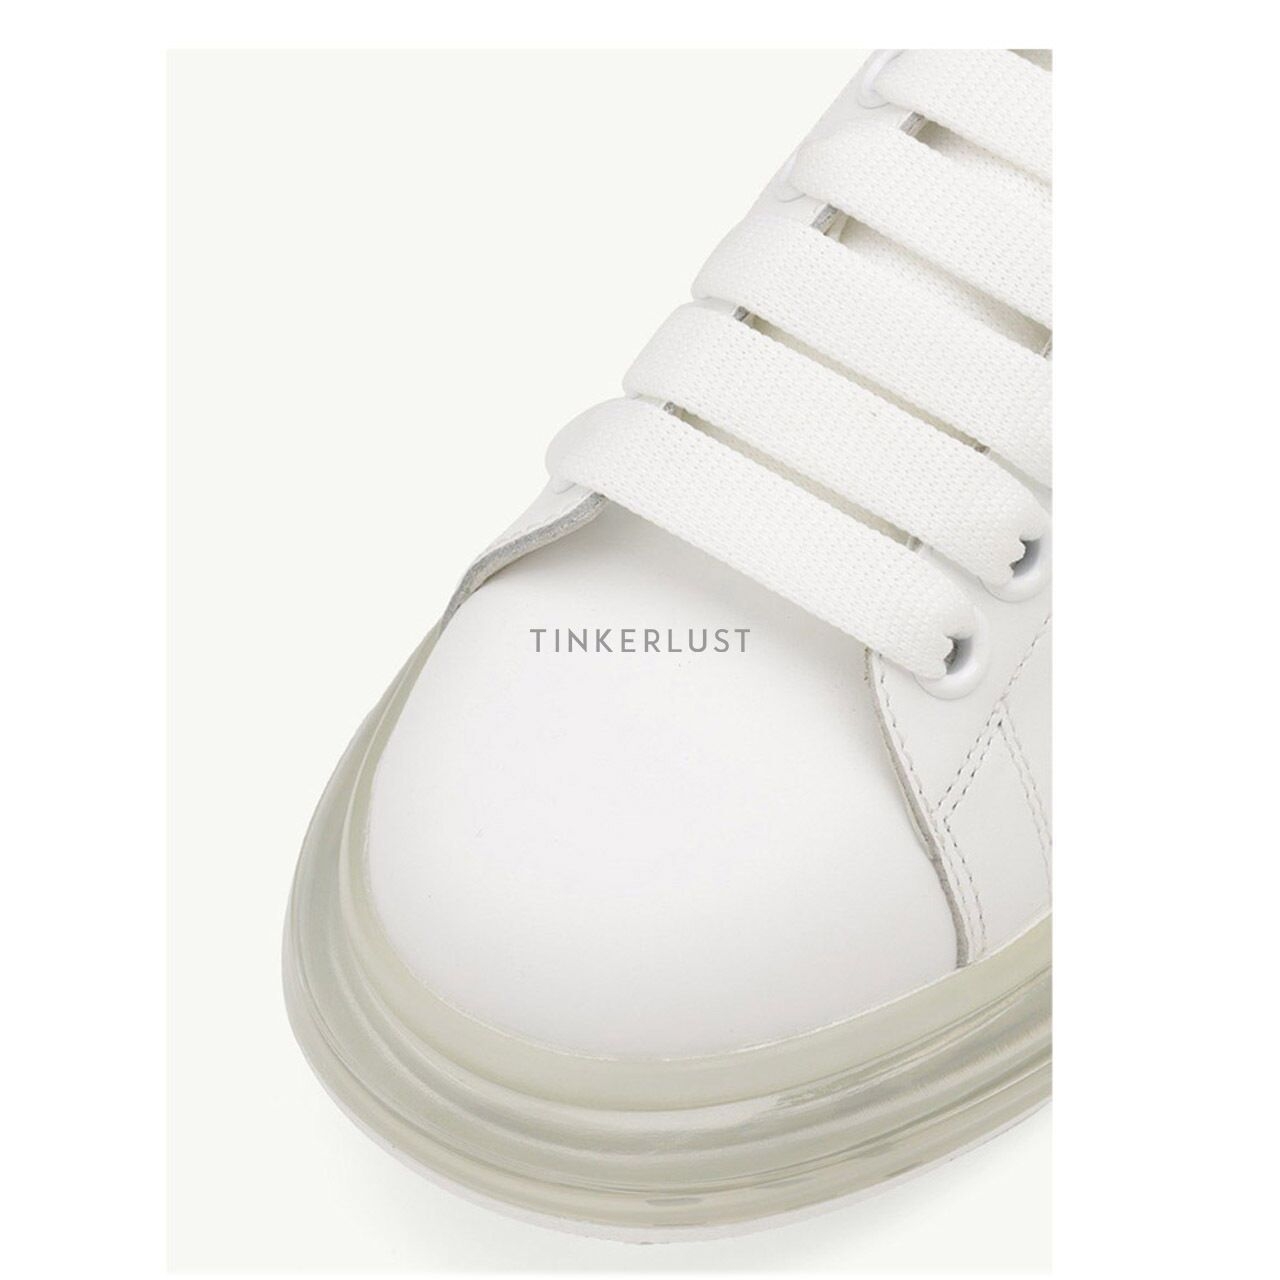  ALEXANDER MCQUEEN Women Transparent Oversized Lace-up Sneakers in White/Black Smooth Leather